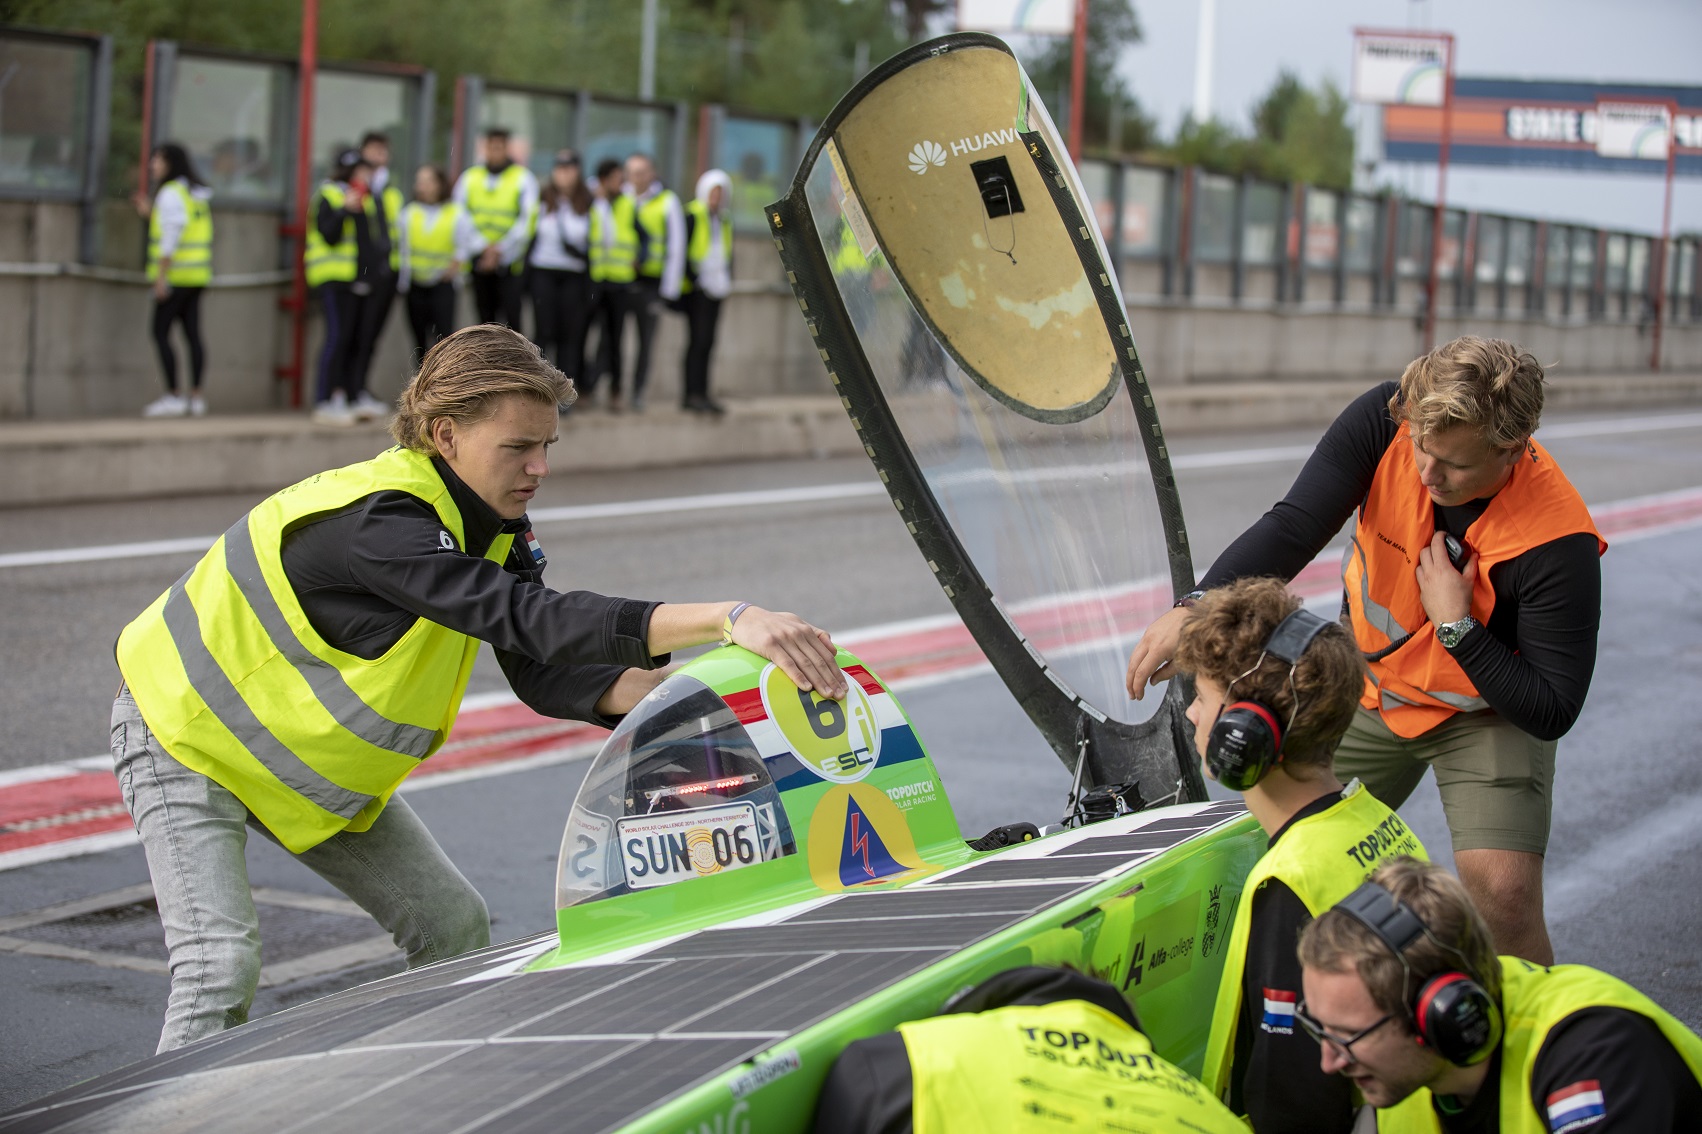 Photo impression of the Top Dutch Solar Racing team in the iESC